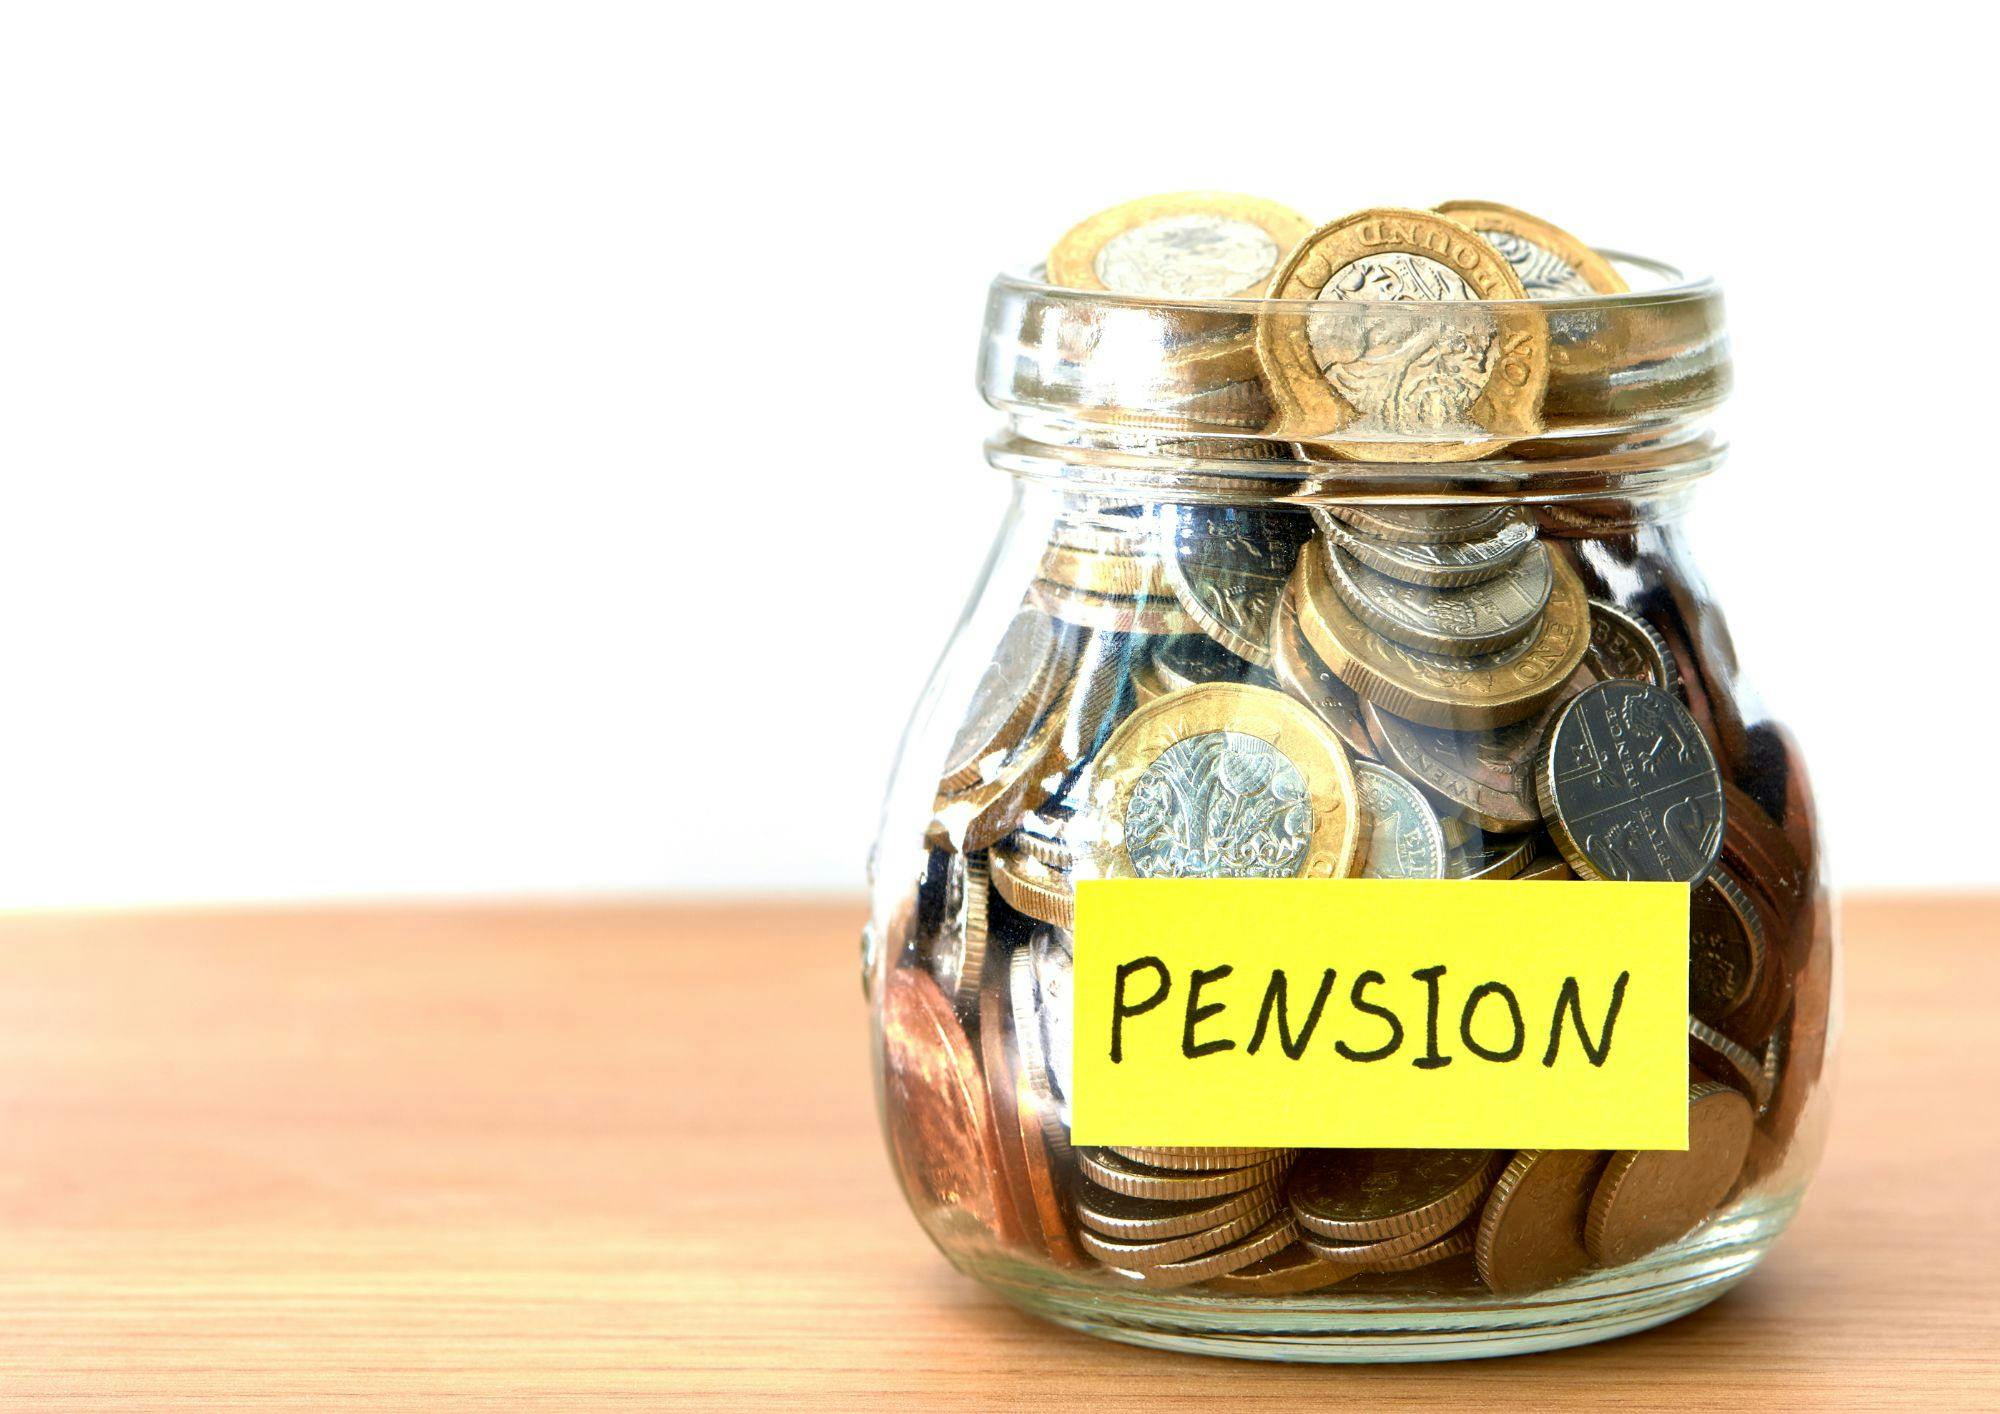 Stock image of a pension pot